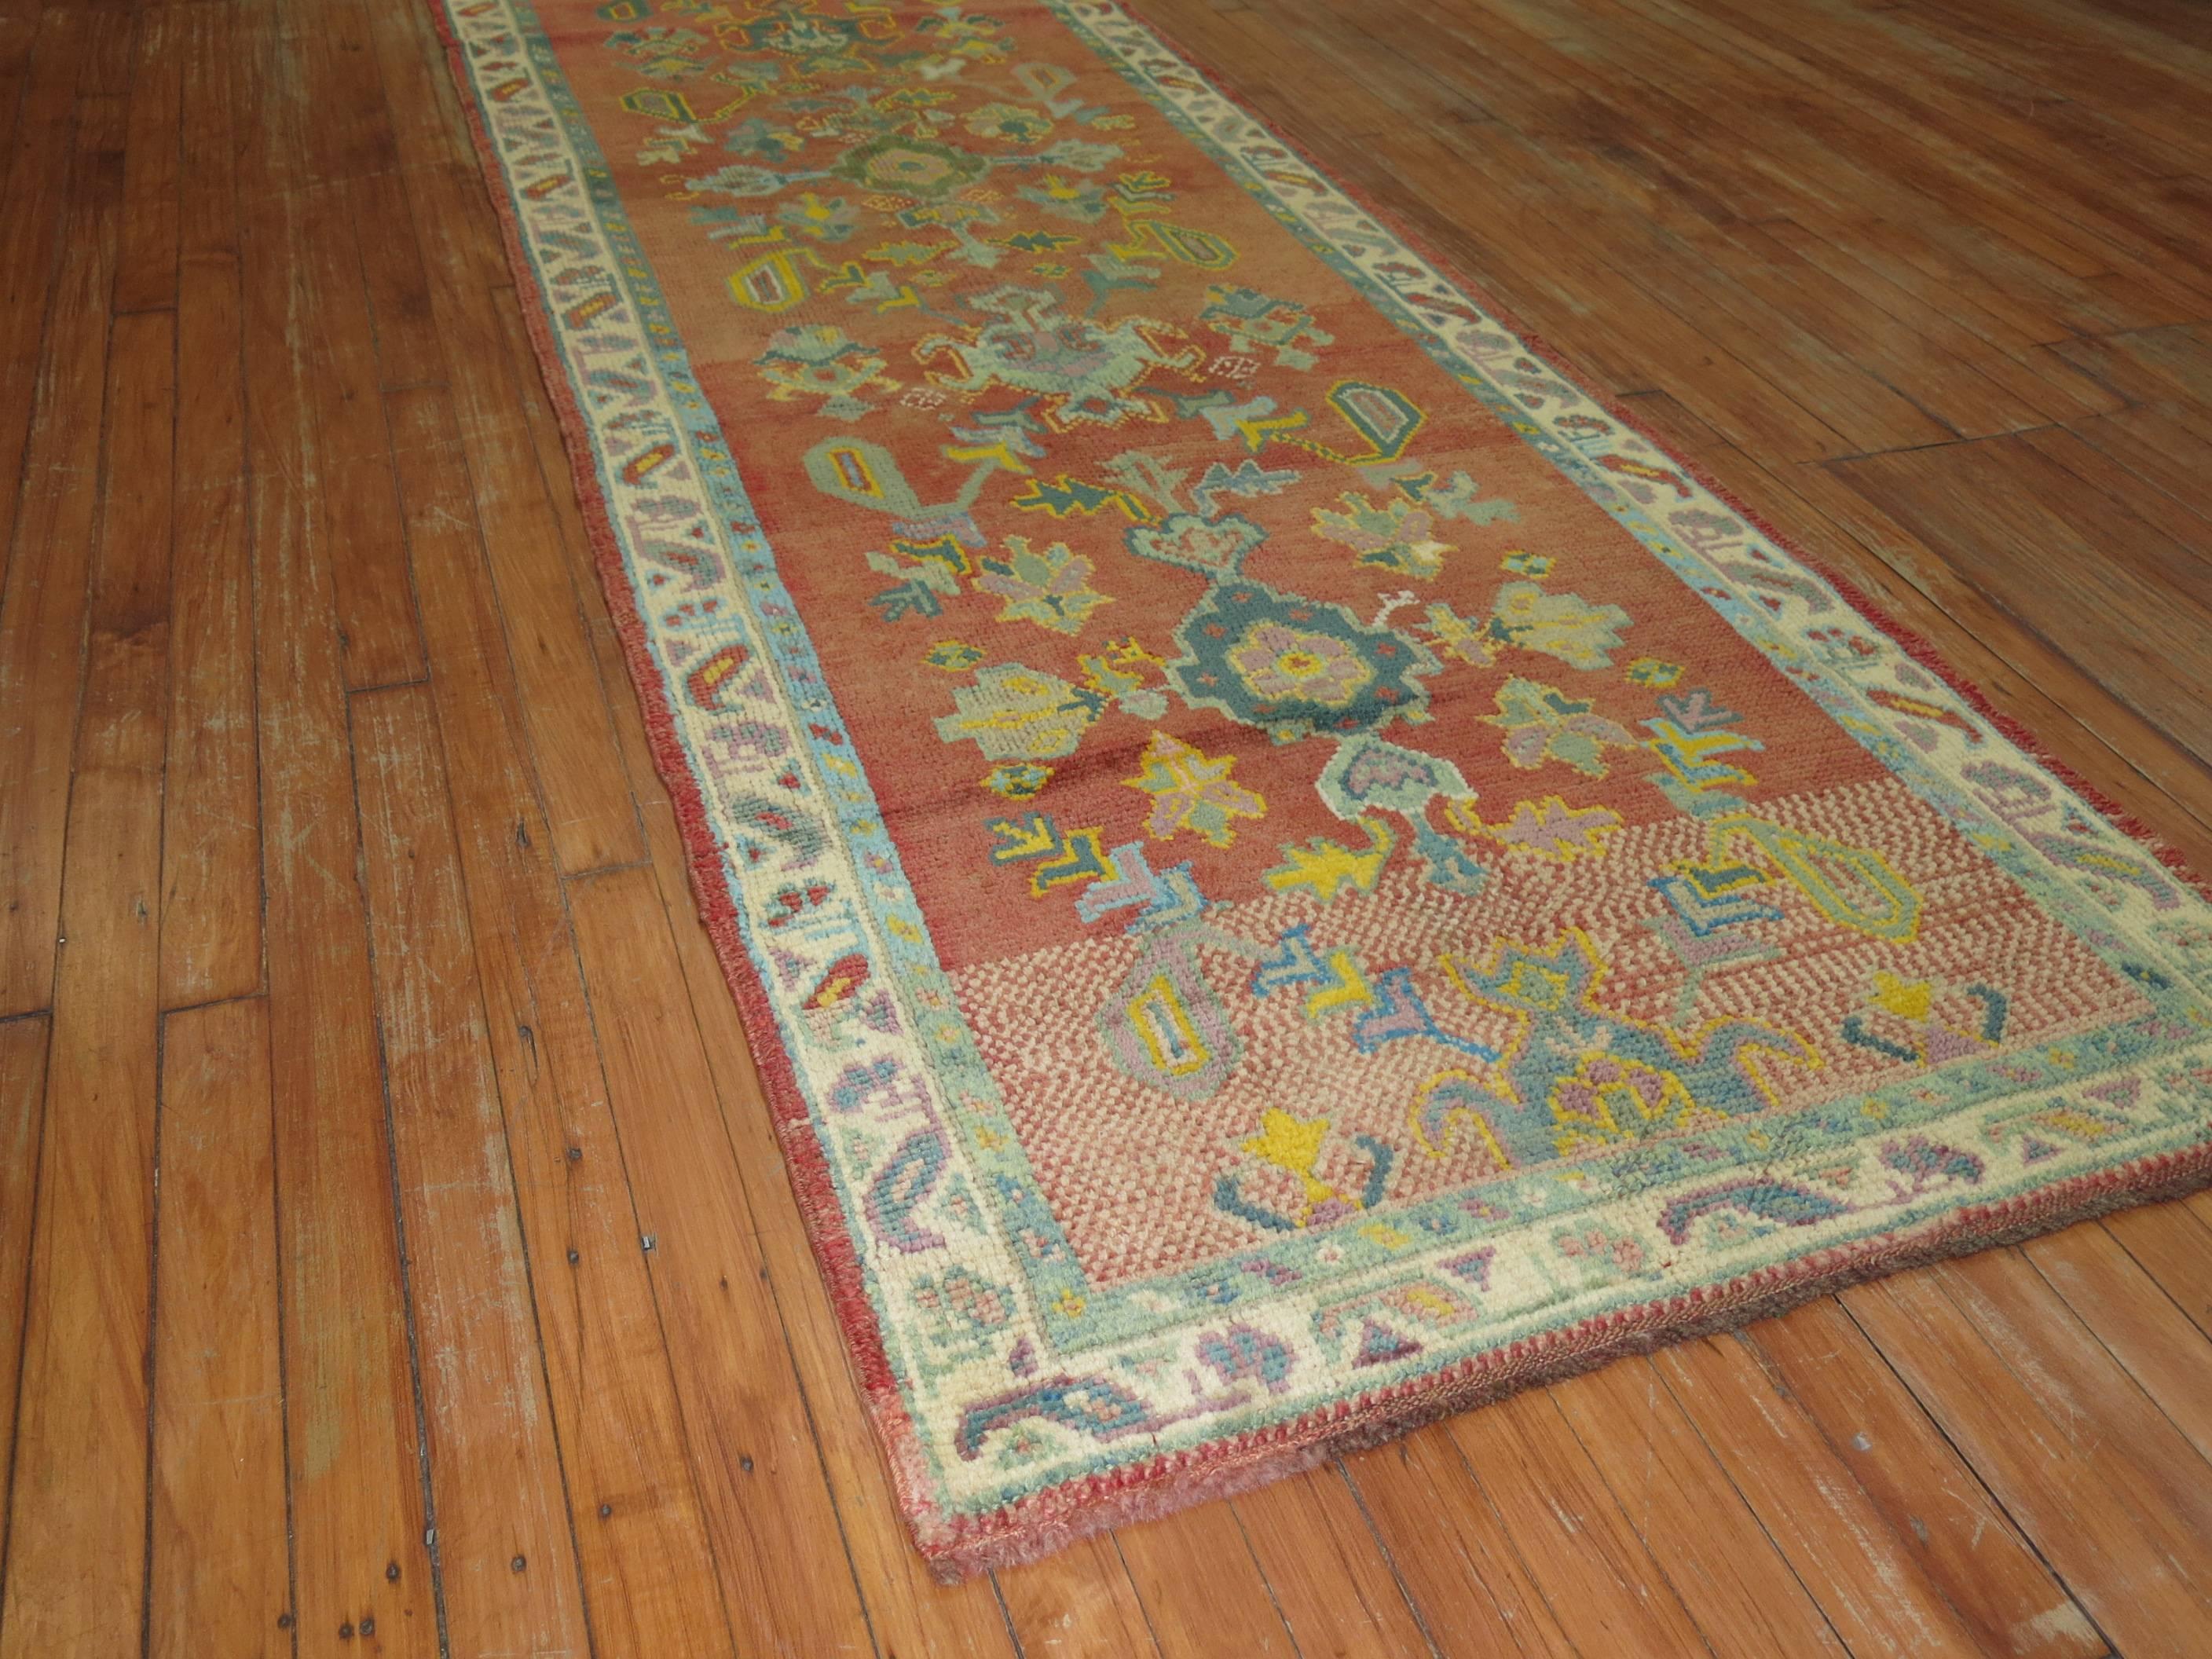 Colorful one of a kind antique Turkish oushak runner.

Measures: 3'2'' x 12'10''.